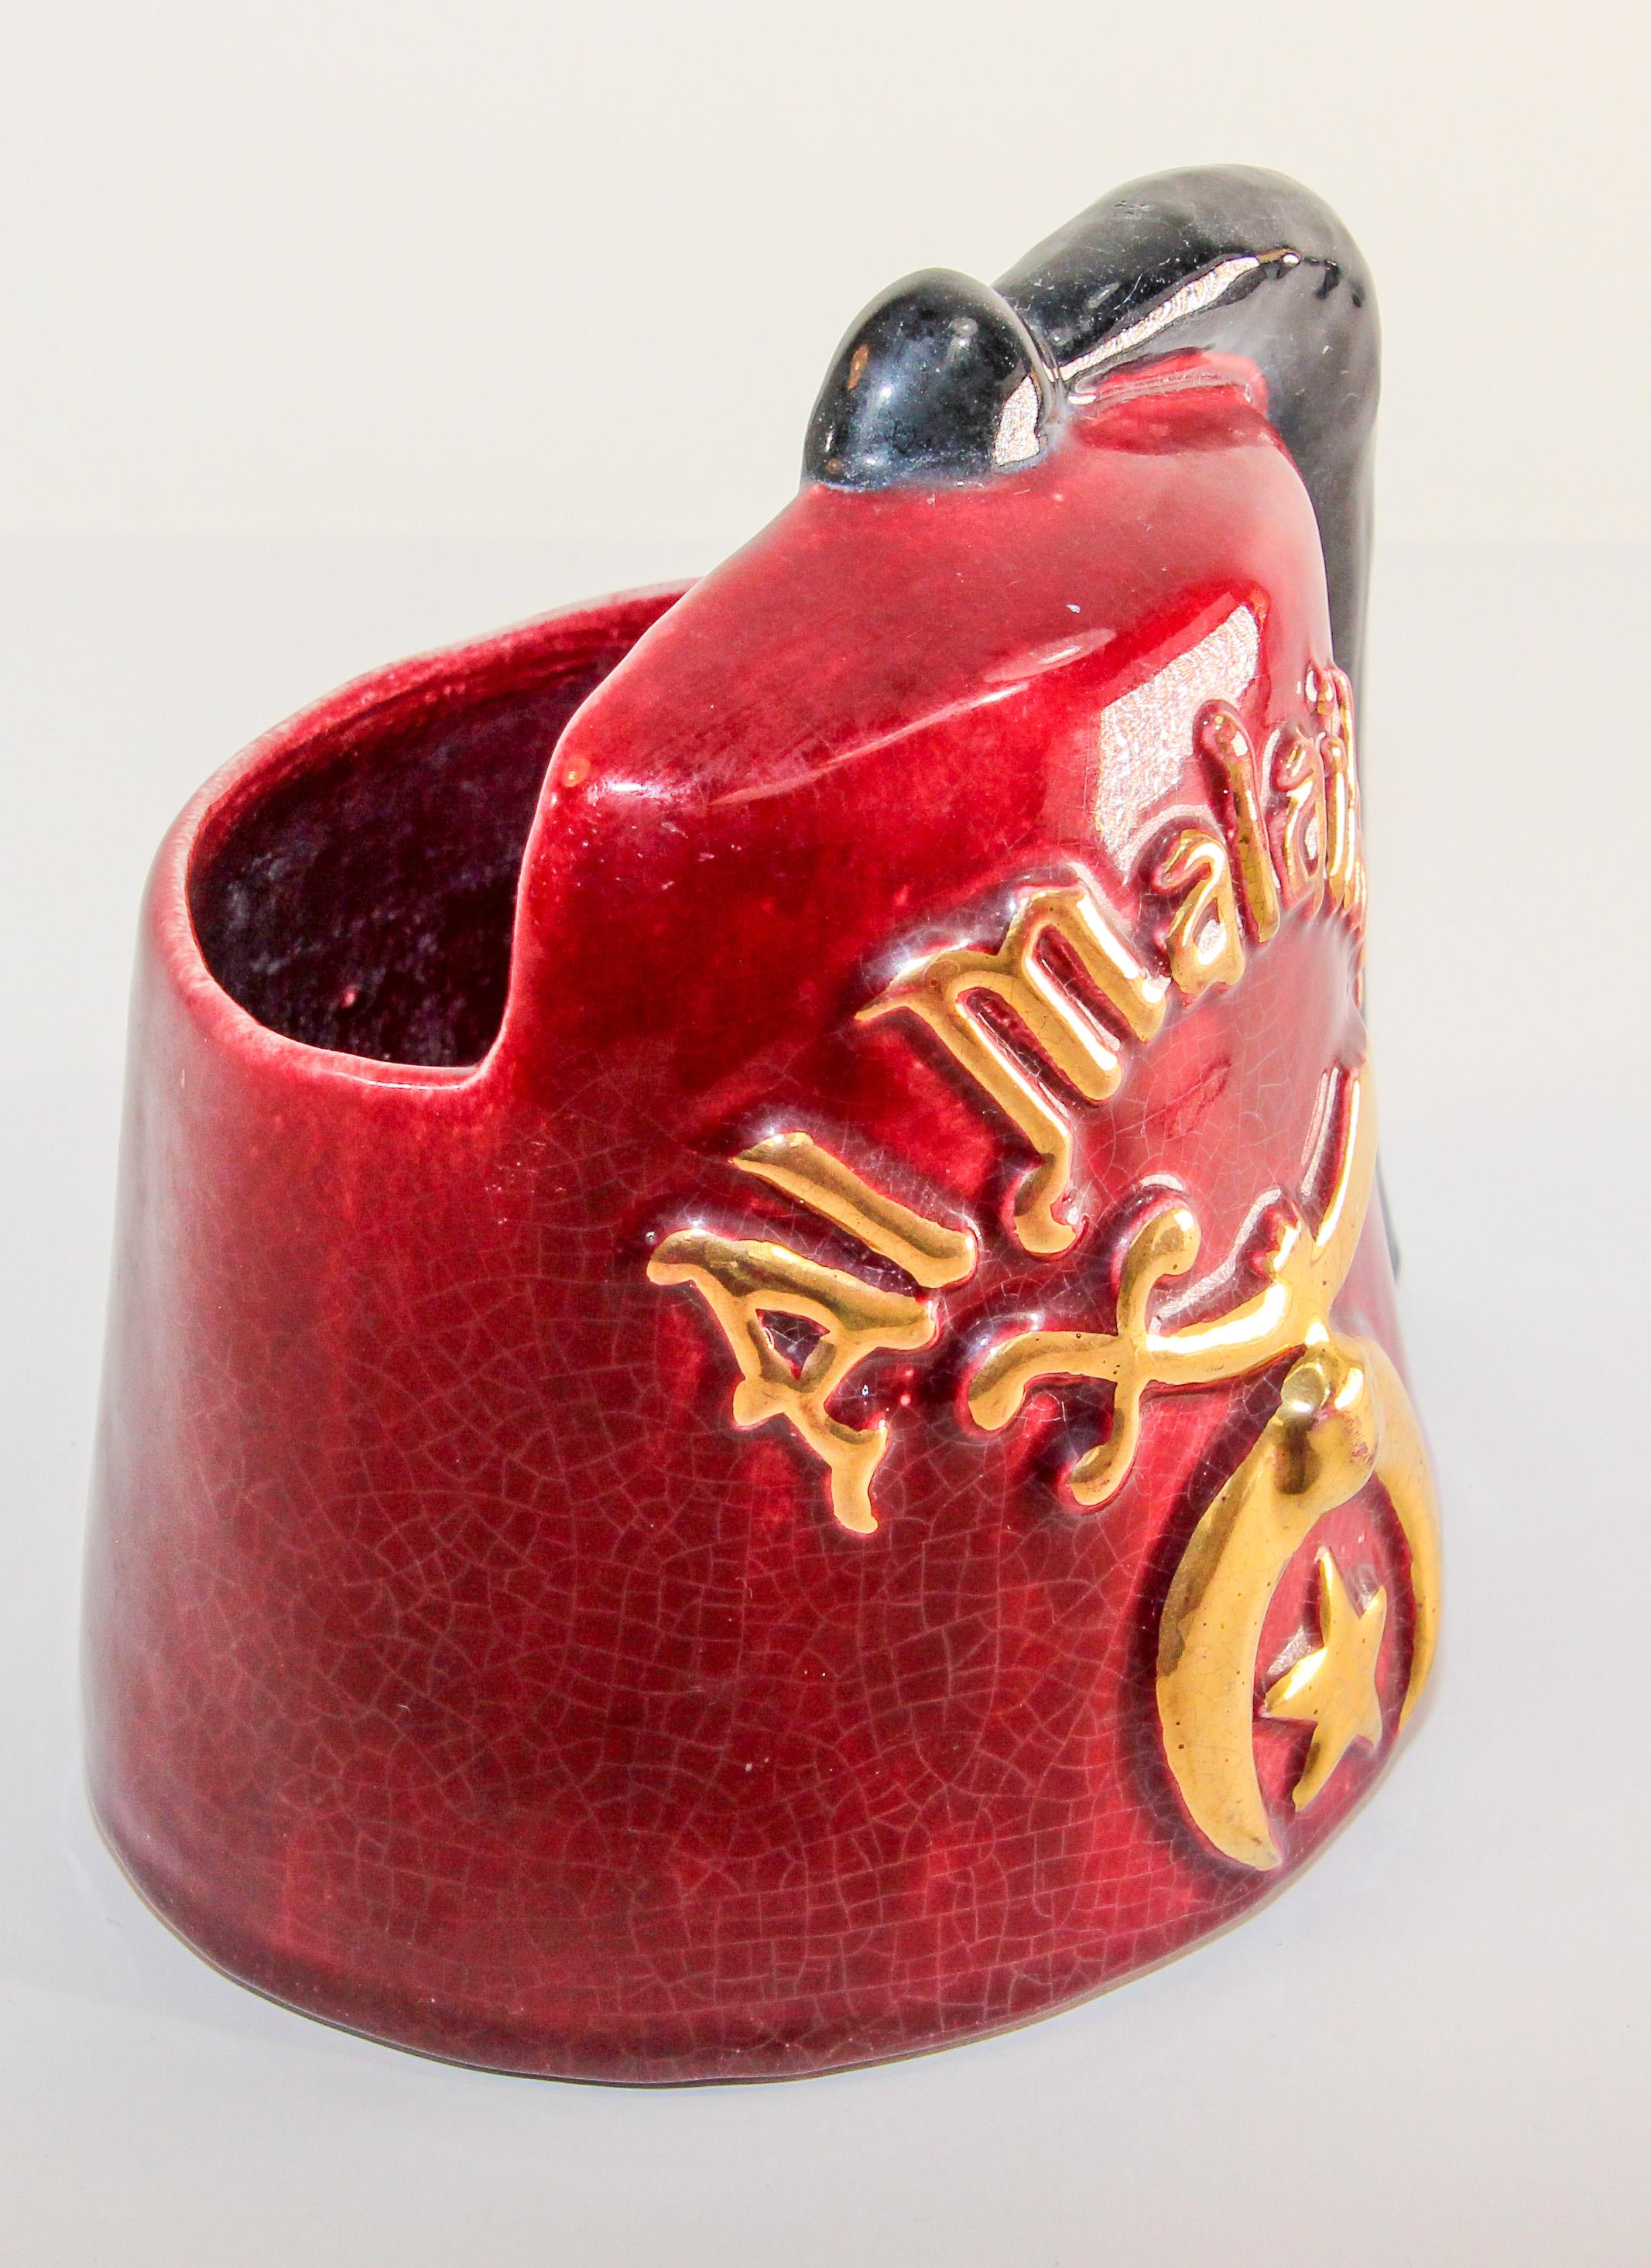 Vintage Masonic Shriner Burgundy Ceramic Vase In Good Condition For Sale In North Hollywood, CA